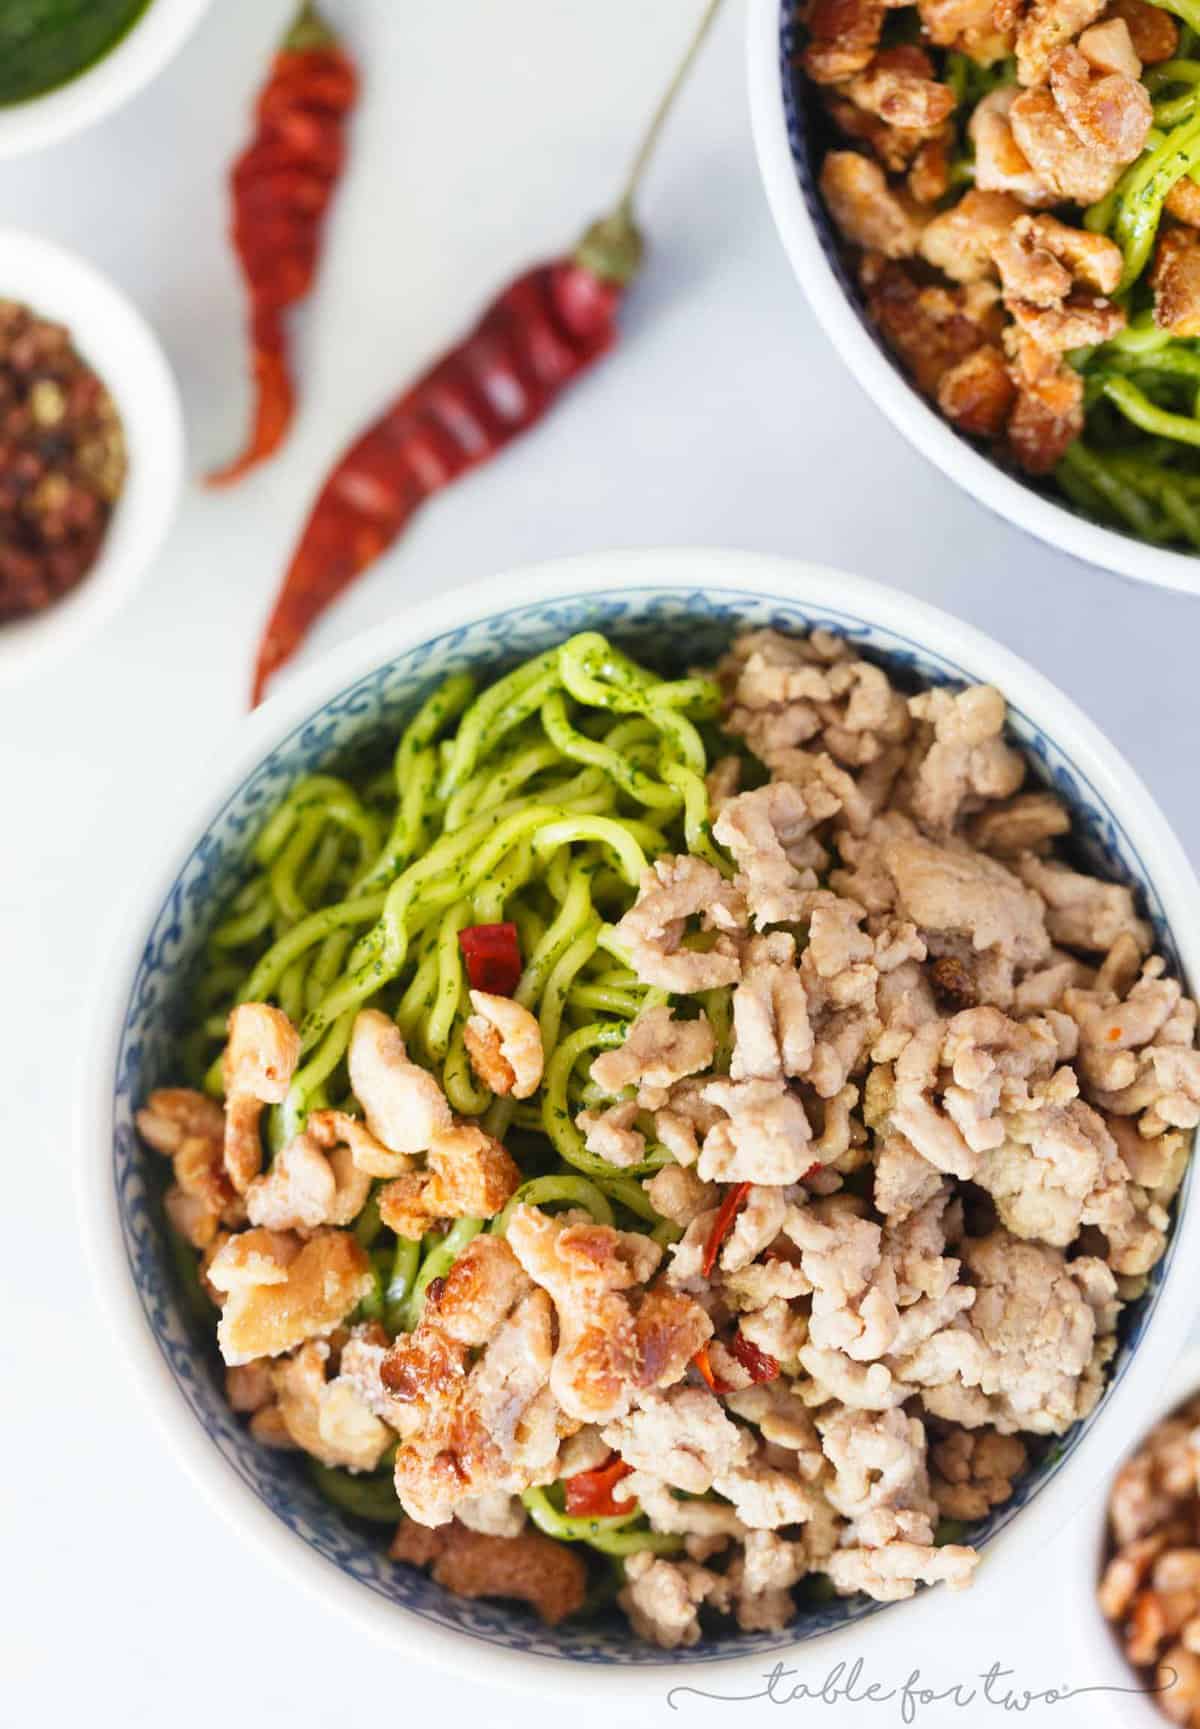 This Momofuku-inspired spicy chilled pork ramen dish is everything your tastebuds have dreamed of! The cool and spicy flavors pair perfectly with the candied cashews on top. If you can't get yourself to David Chang's Momofuku restaurant, I feel that this dish is a great runner up!